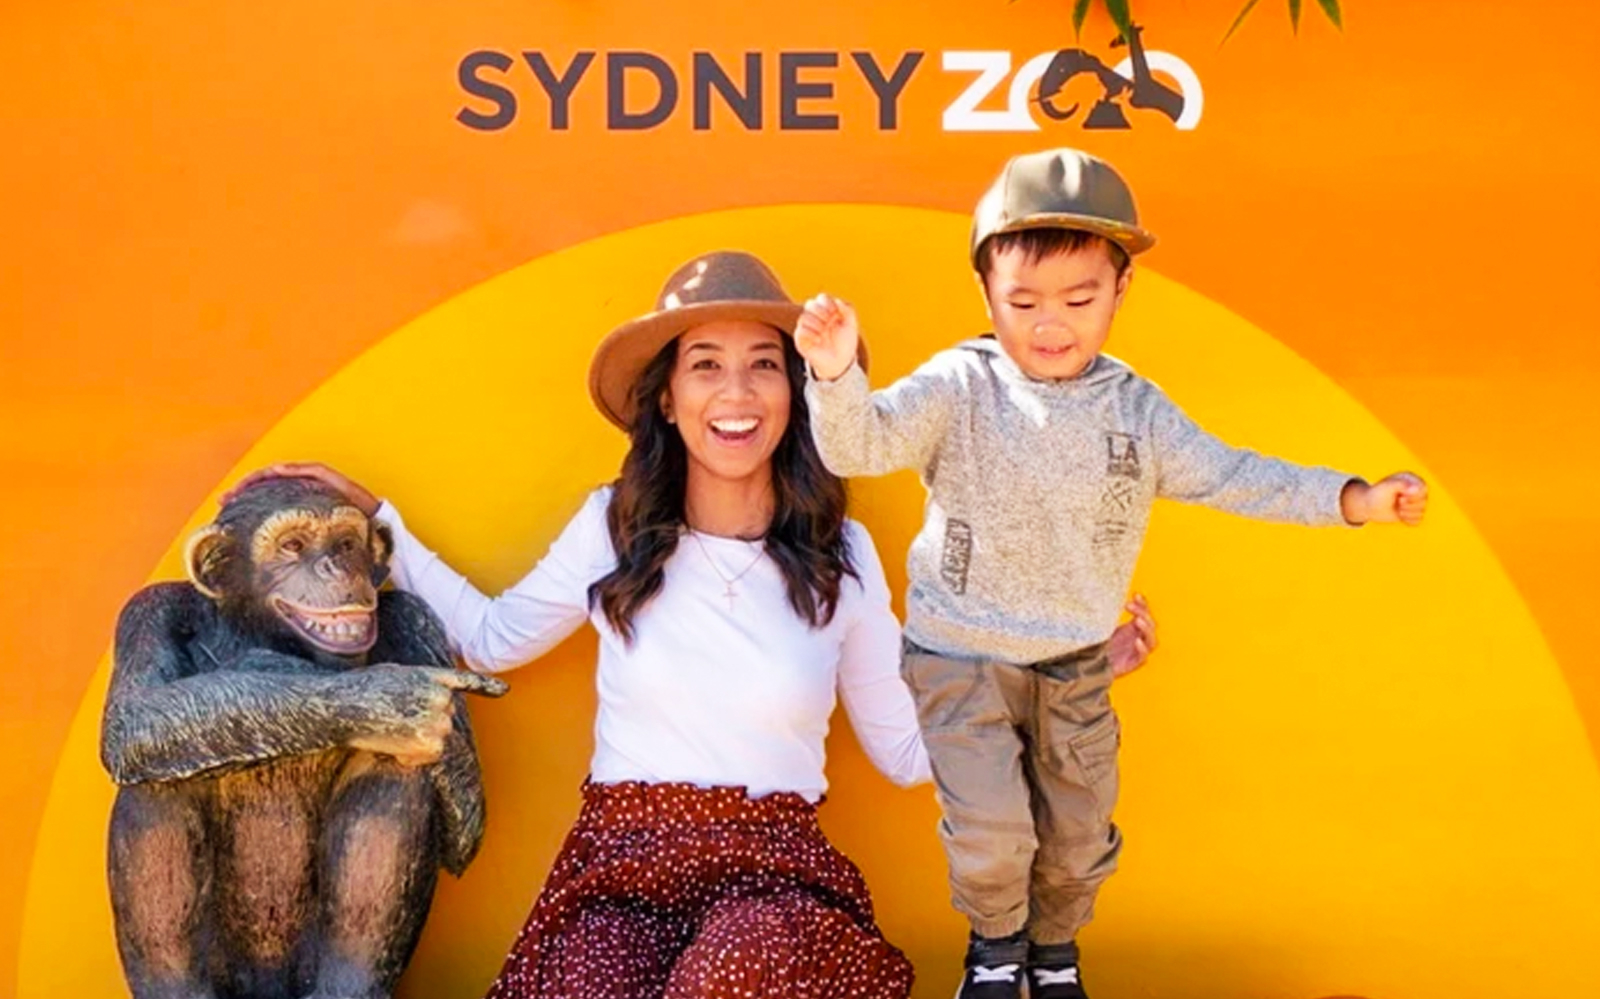 Image of Sydney Zoo Entry Tickets